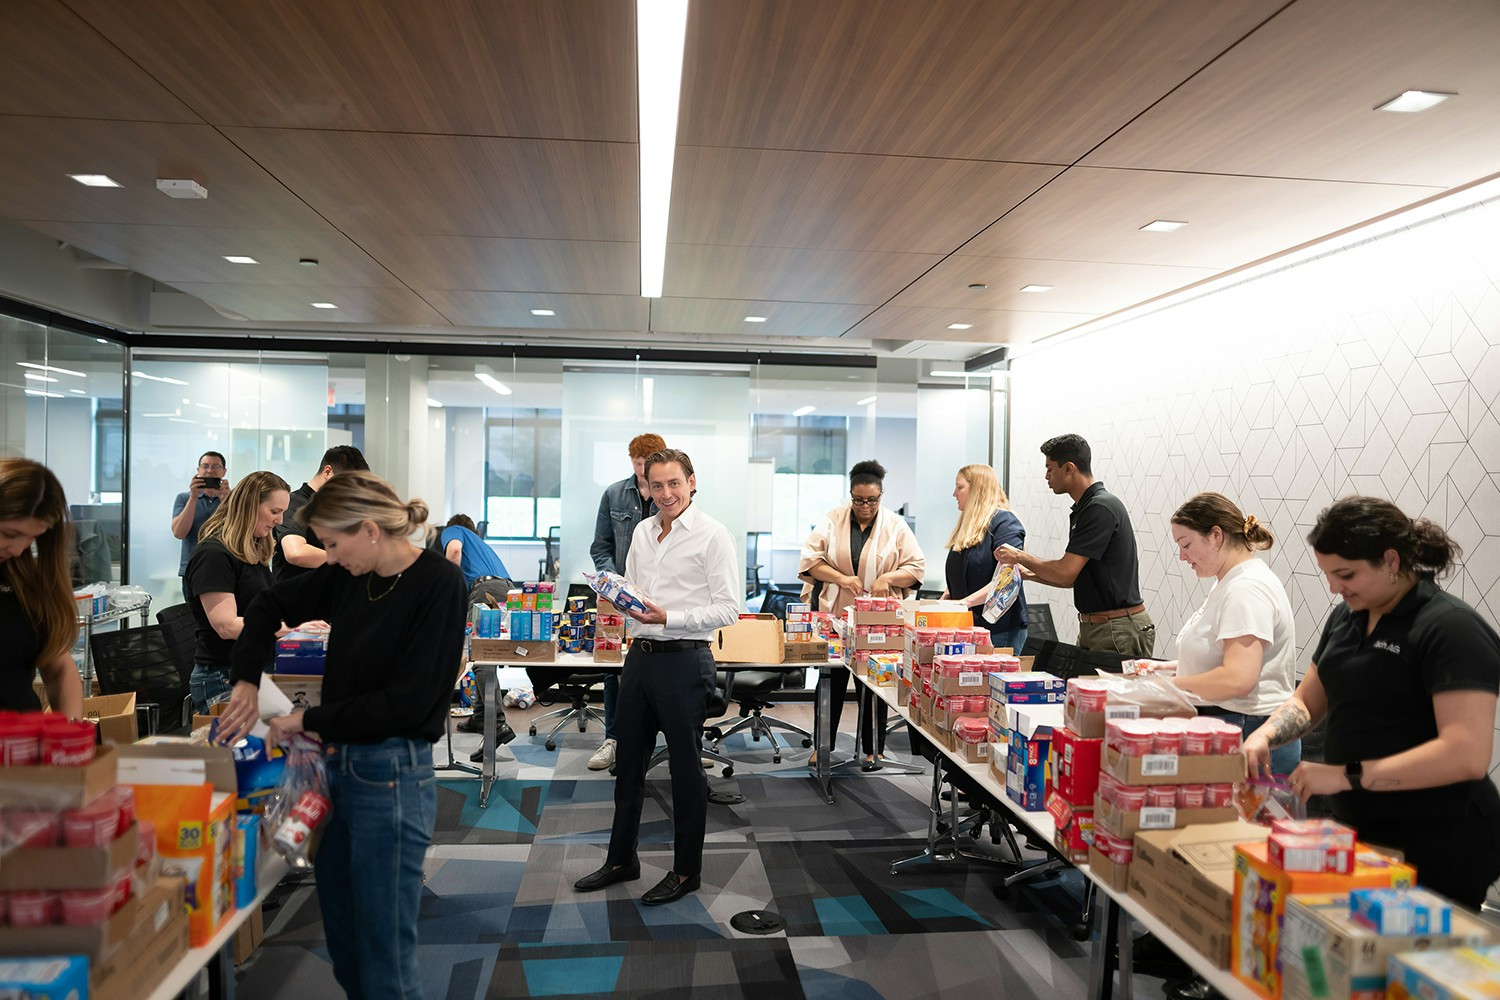 iTechians come together to give back to the community, creating weekend food packs for local school children in need.